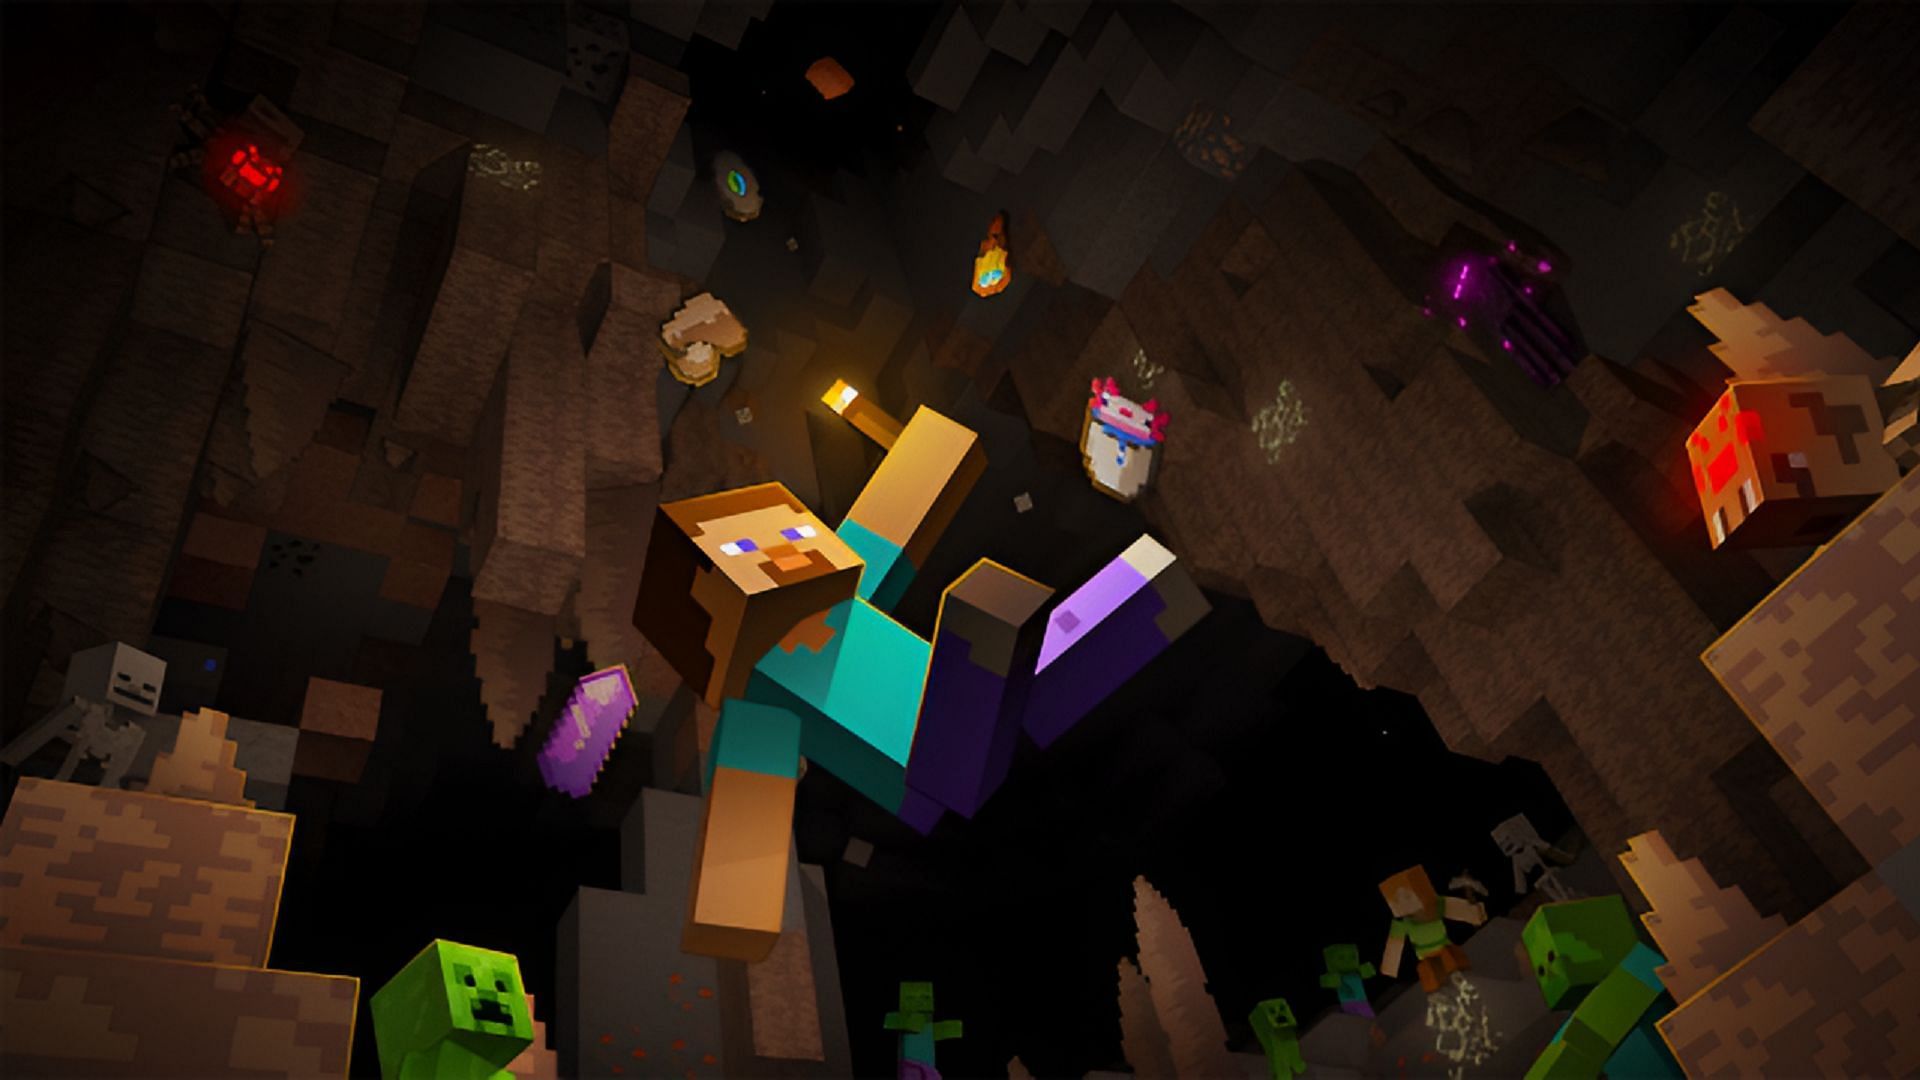 Bare Bones re-envisions Minecraft as it looks in its promotional trailers. (Image via RobotPants/MCPEDL)